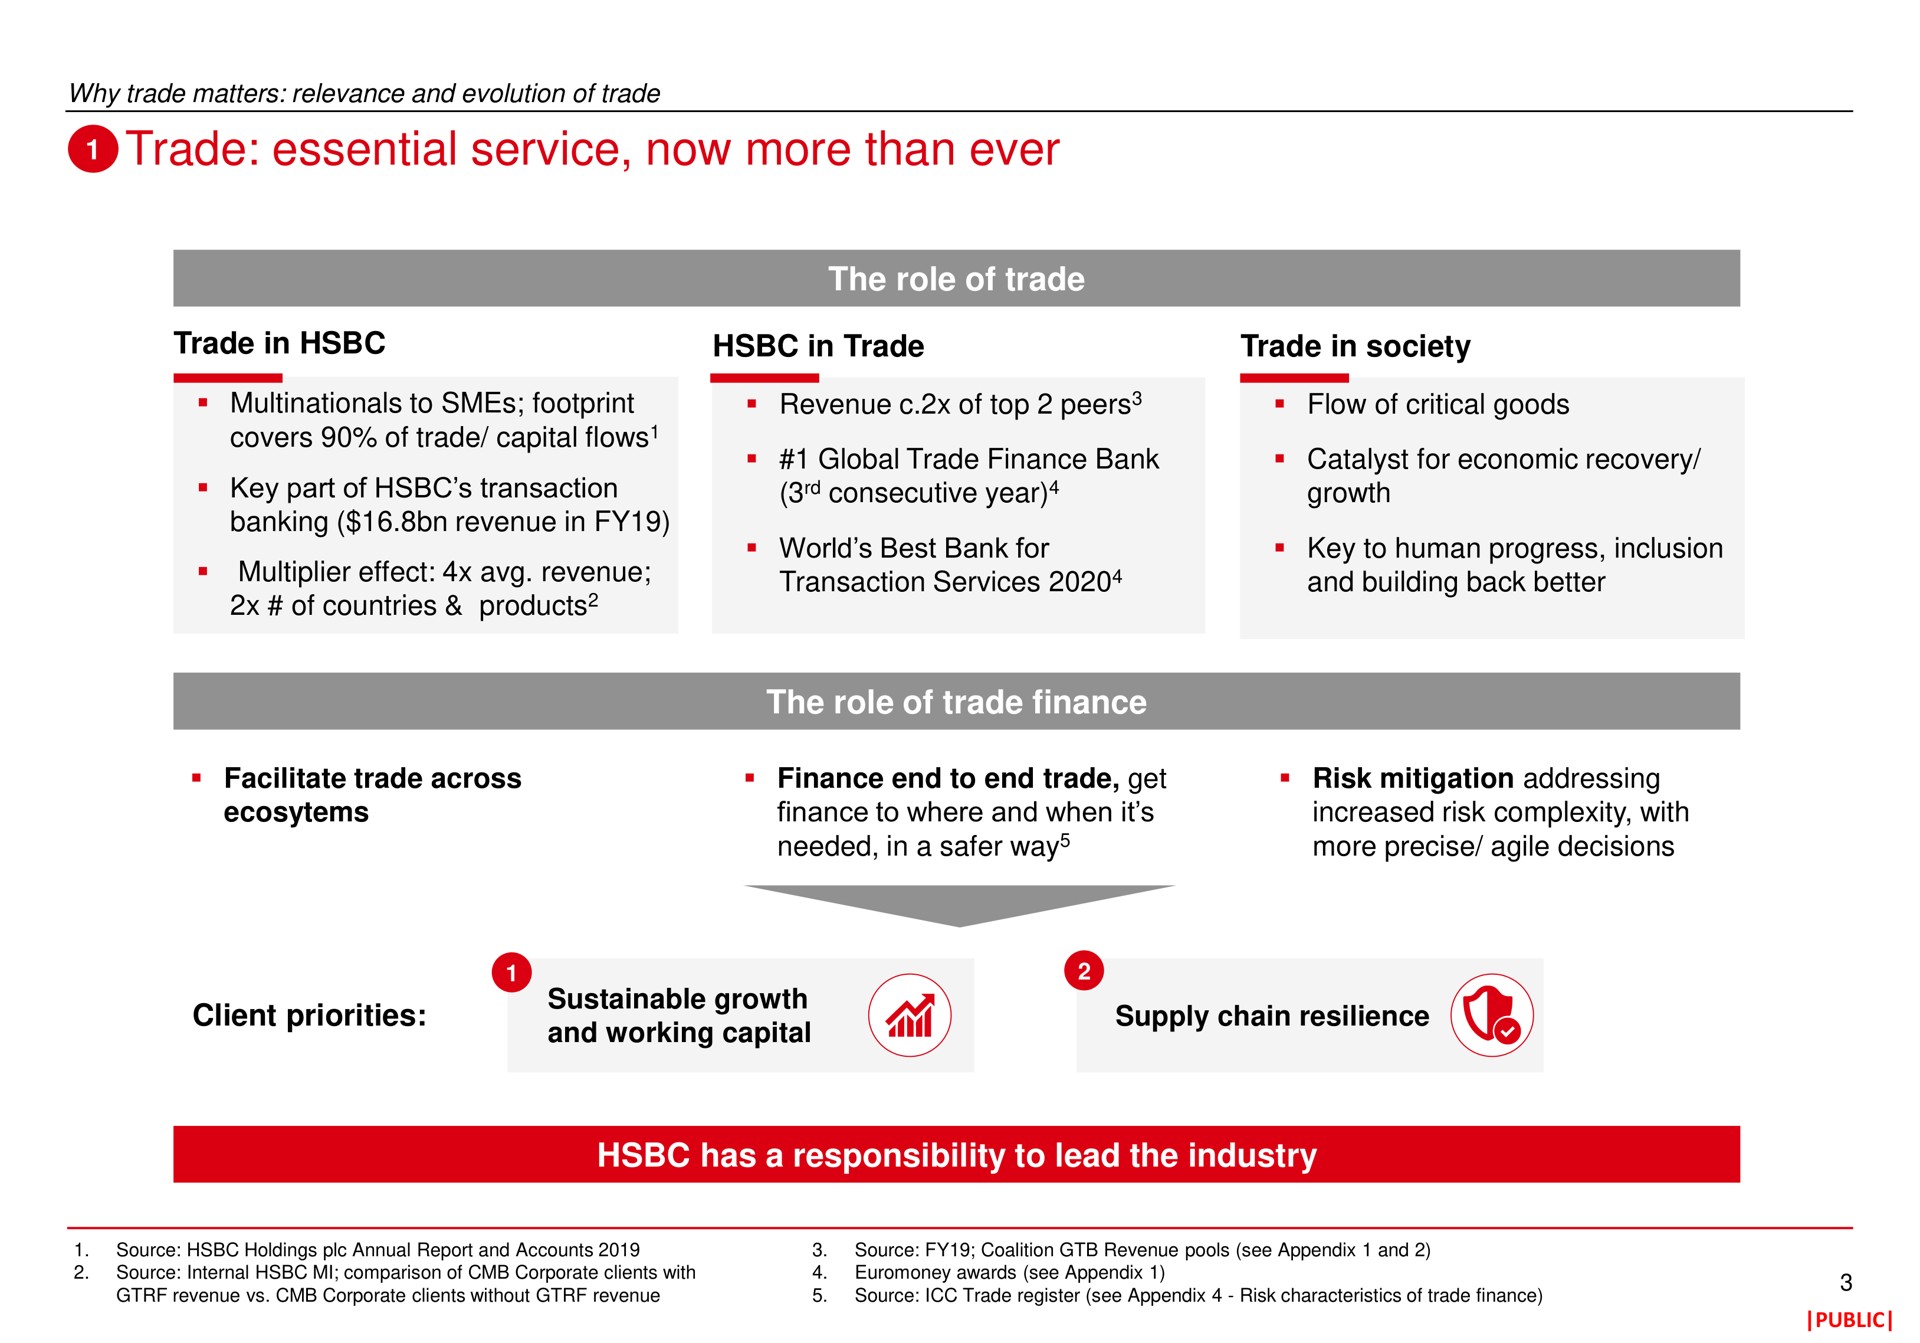 trade essential service now more than ever the role of trade the role of trade finance has a responsibility to lead the industry | HSBC